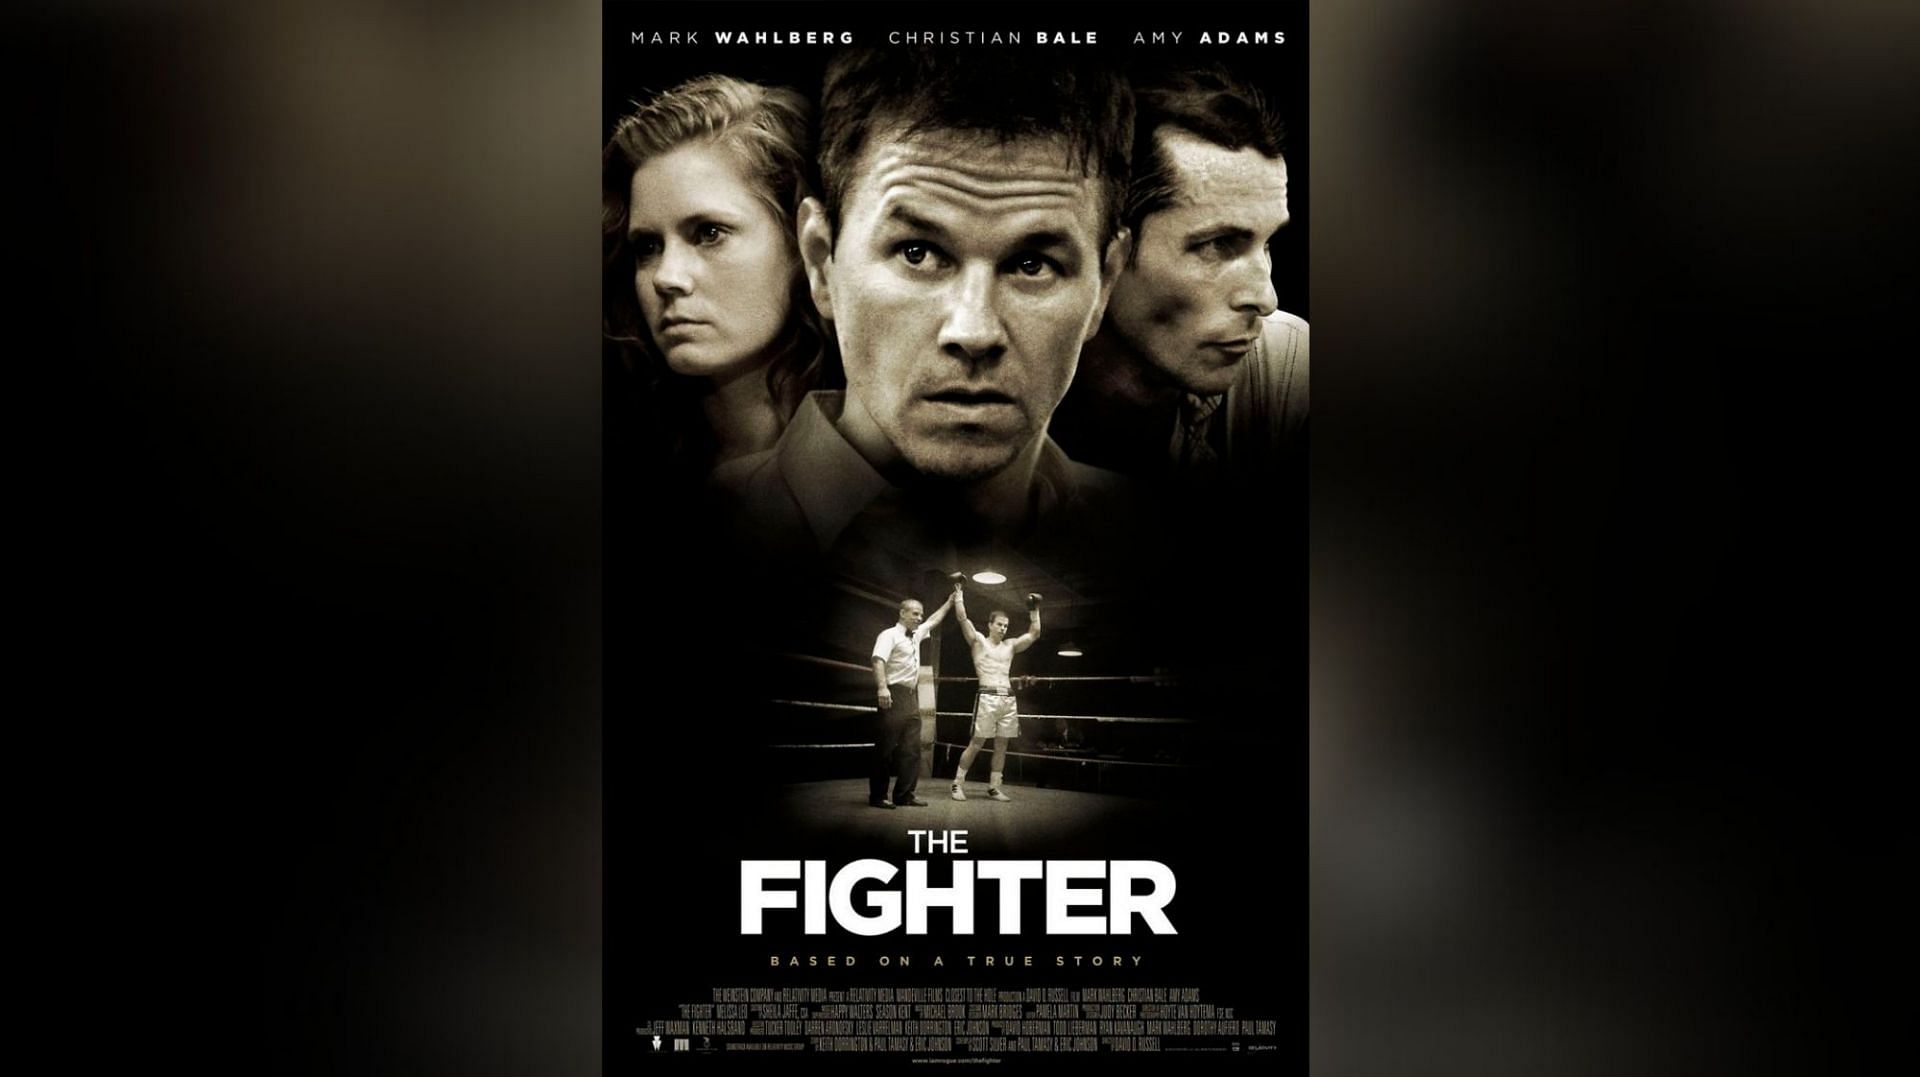 The Fighter (Image via Paramount Pictures)